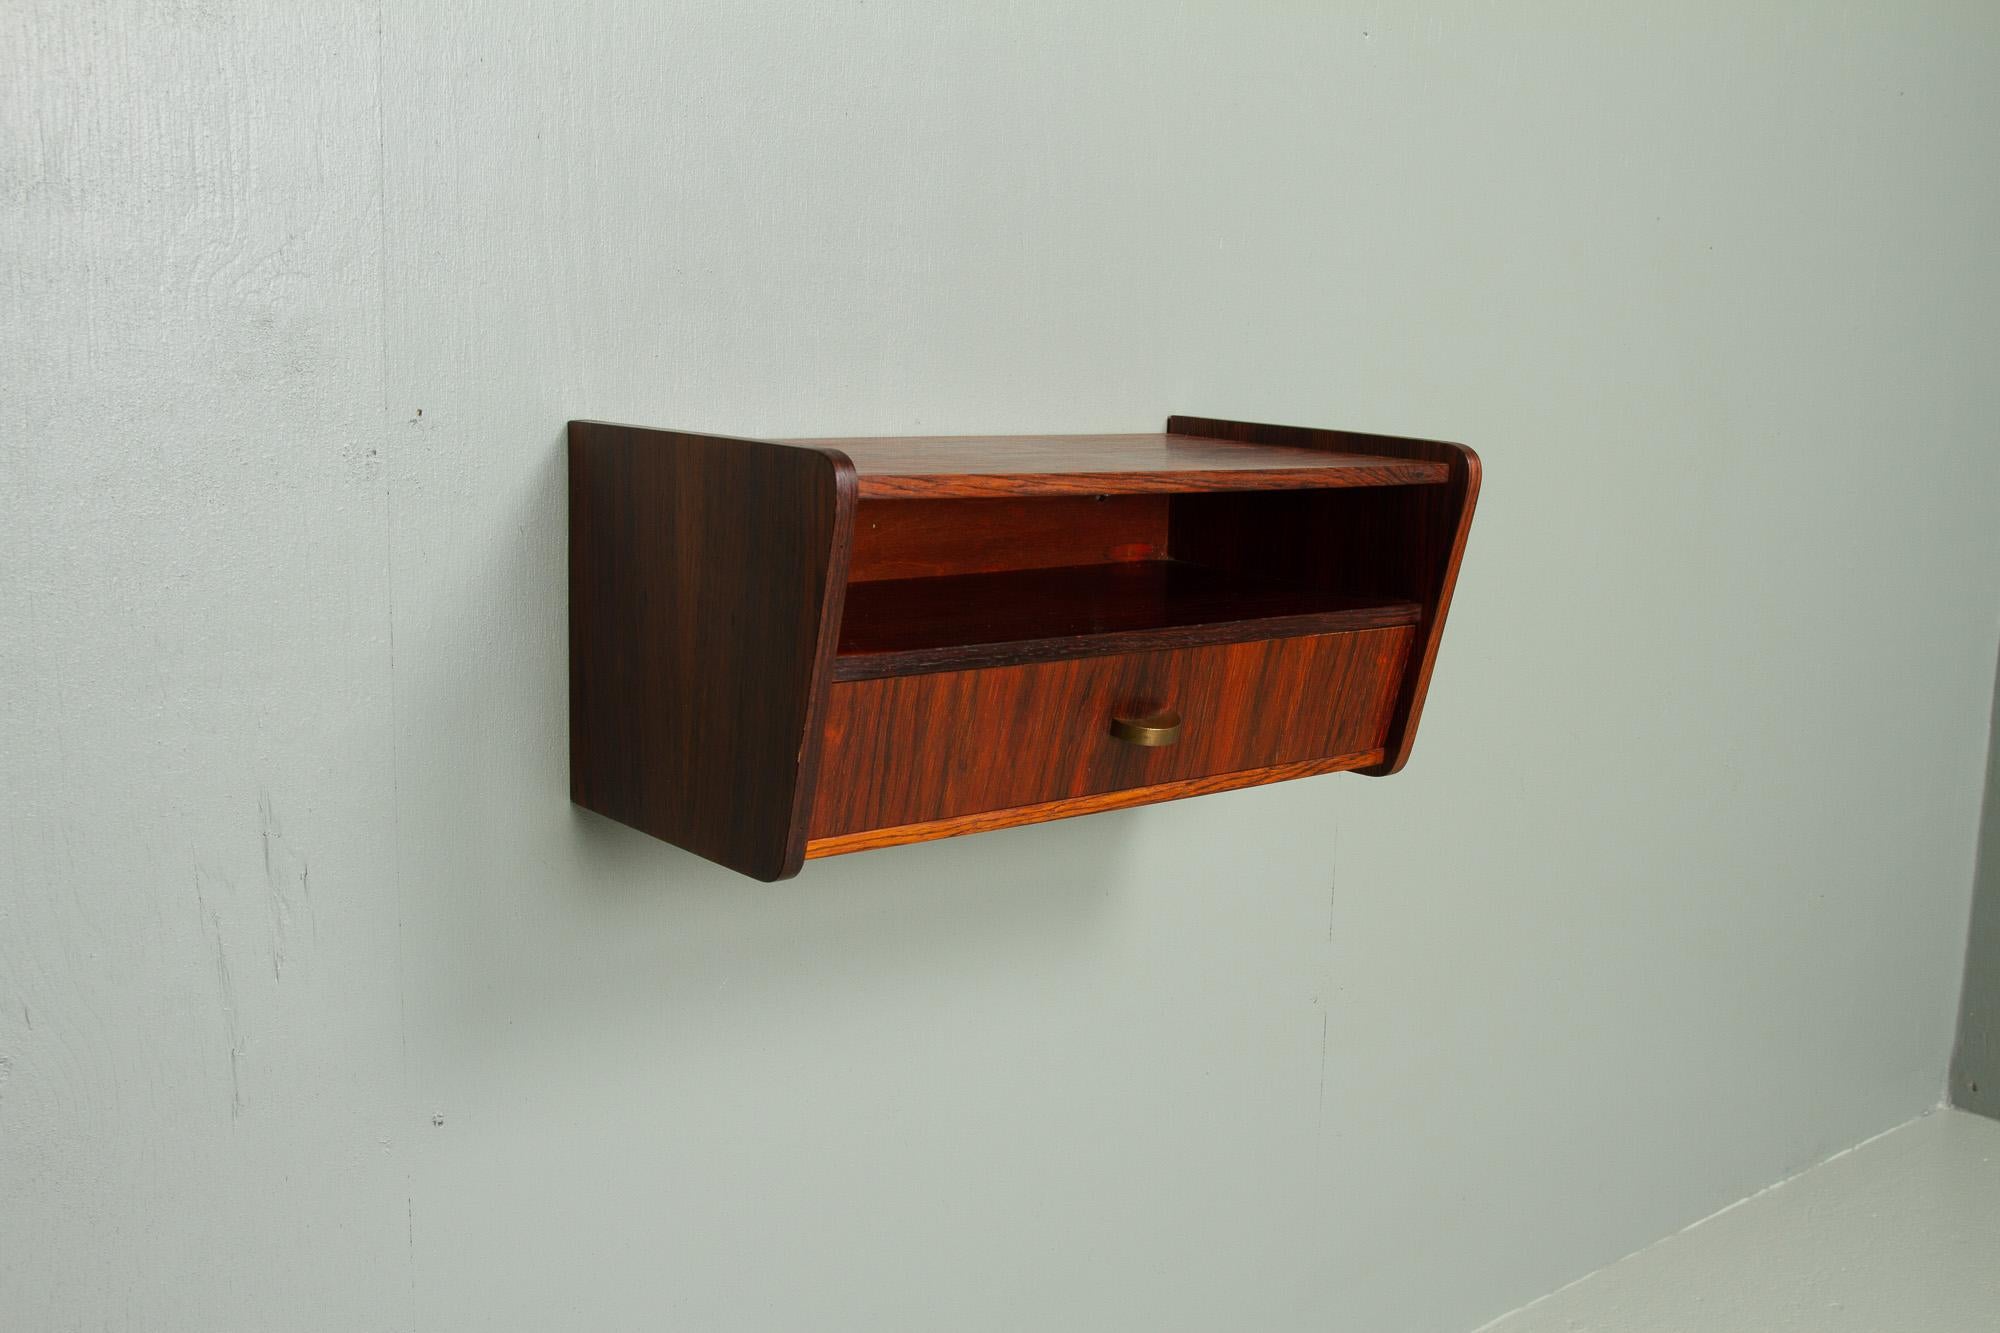 Vintage Danish rosewood floating shelf, 1960s.
Mid-Century Modern wall mounted bedside table/nightstand/wall console made in Denmark in the 1960s. Featuring an open shelf and a drawer with a brass pull.
Beautiful and expressive Rosewood